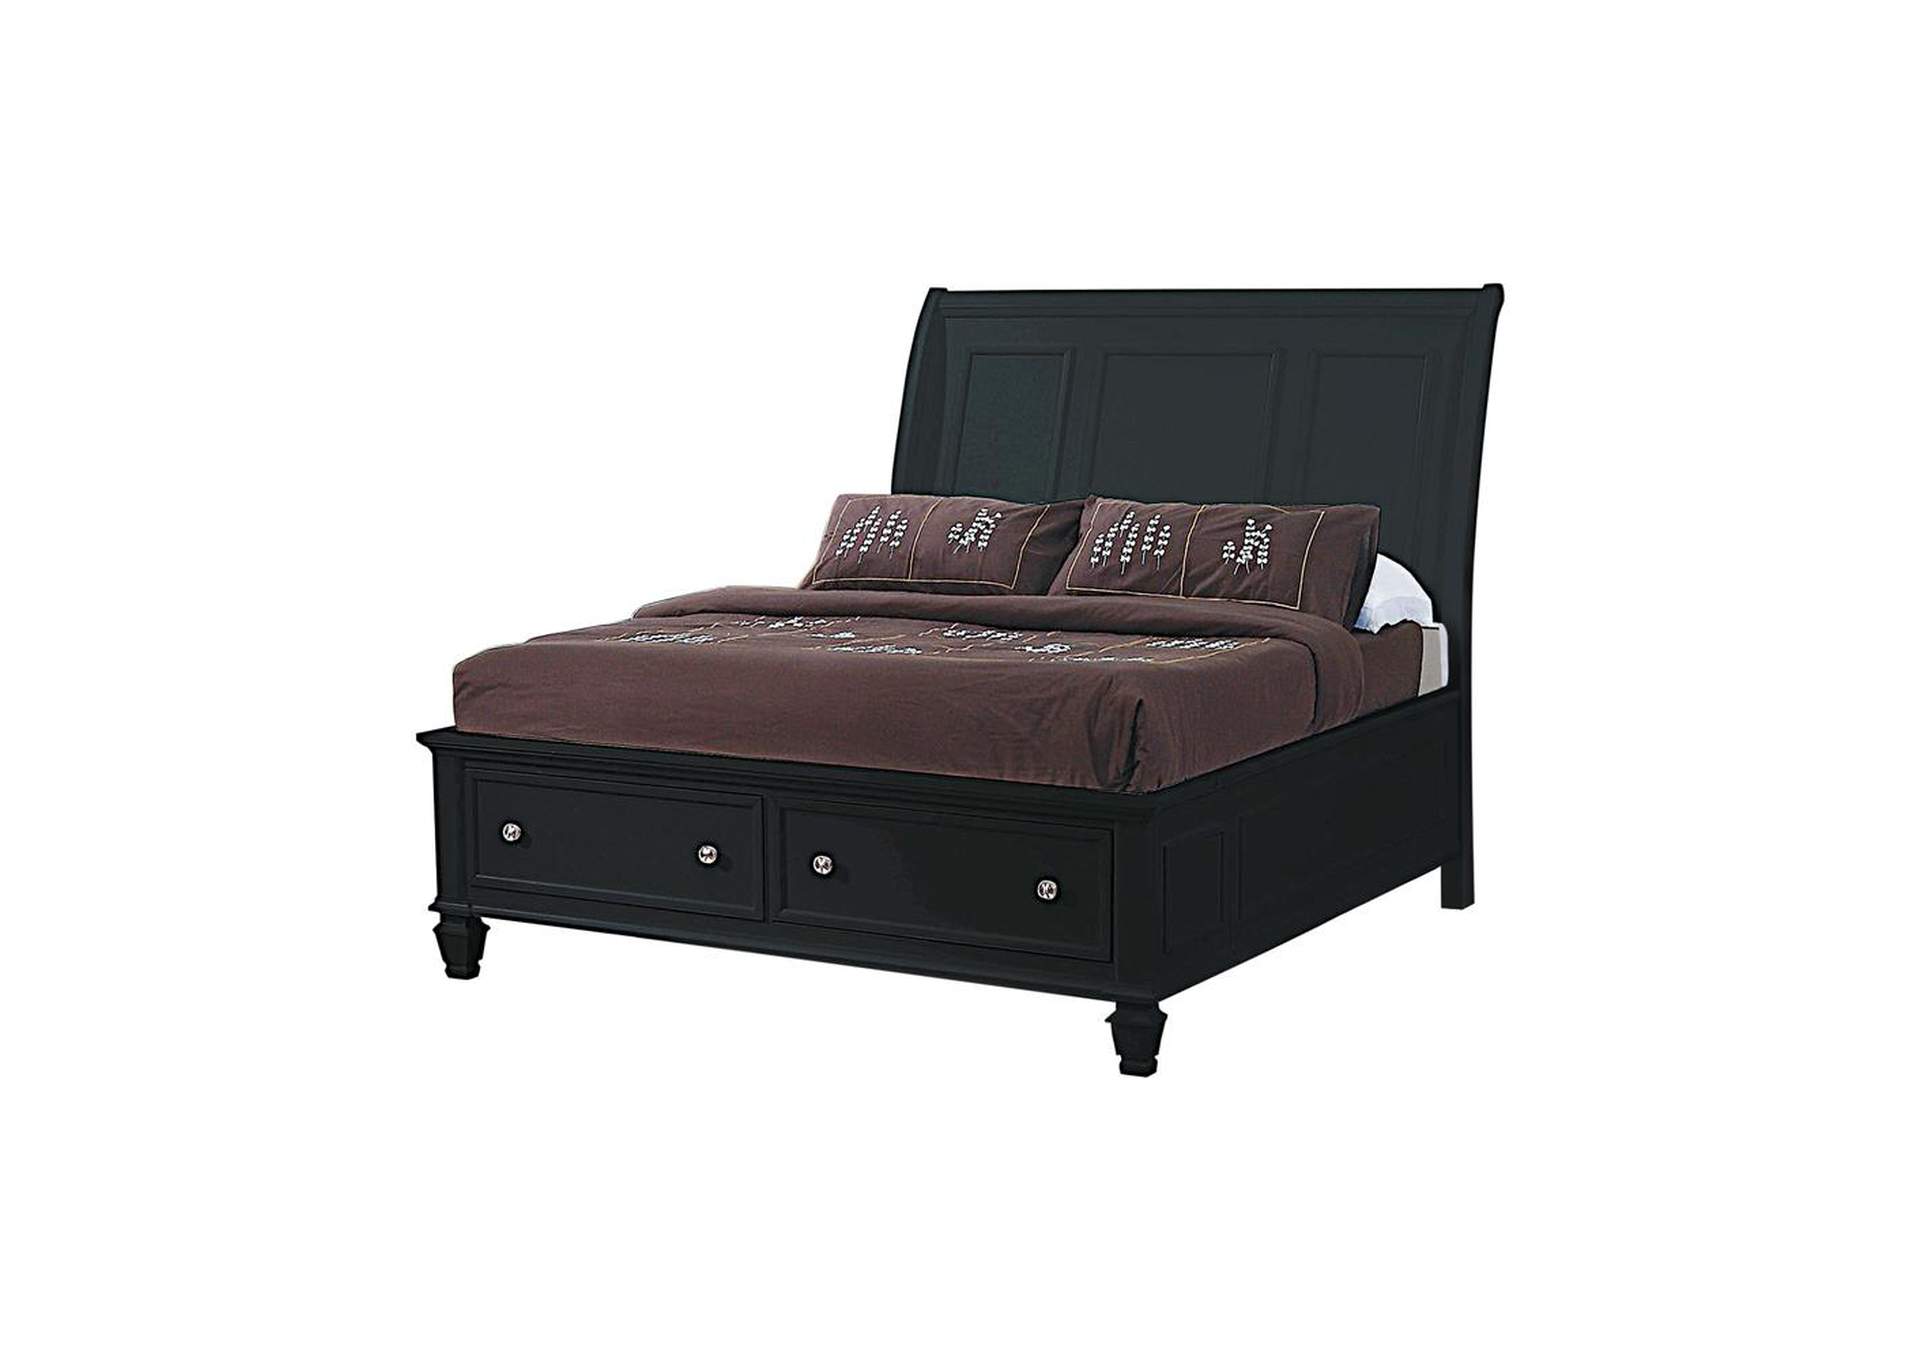 Sandy Beach Black King Sleigh Bed W, King Headboard And Footboard With Storage